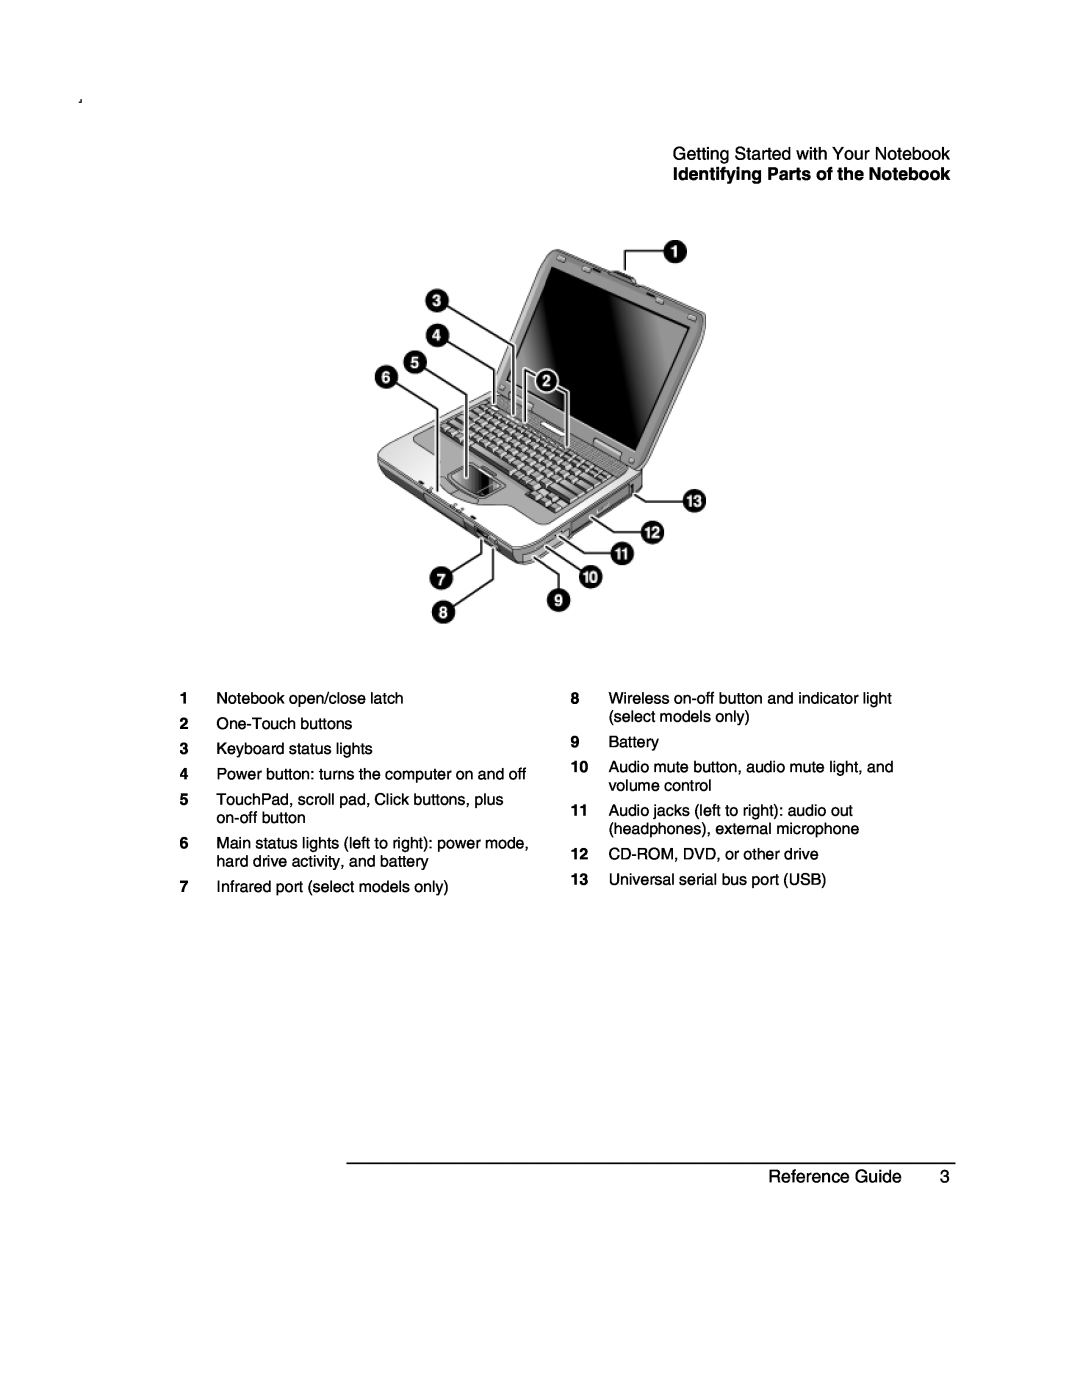 Compaq AMC20493-KT5 manual Getting Started with Your Notebook, Identifying Parts of the Notebook, Reference Guide 